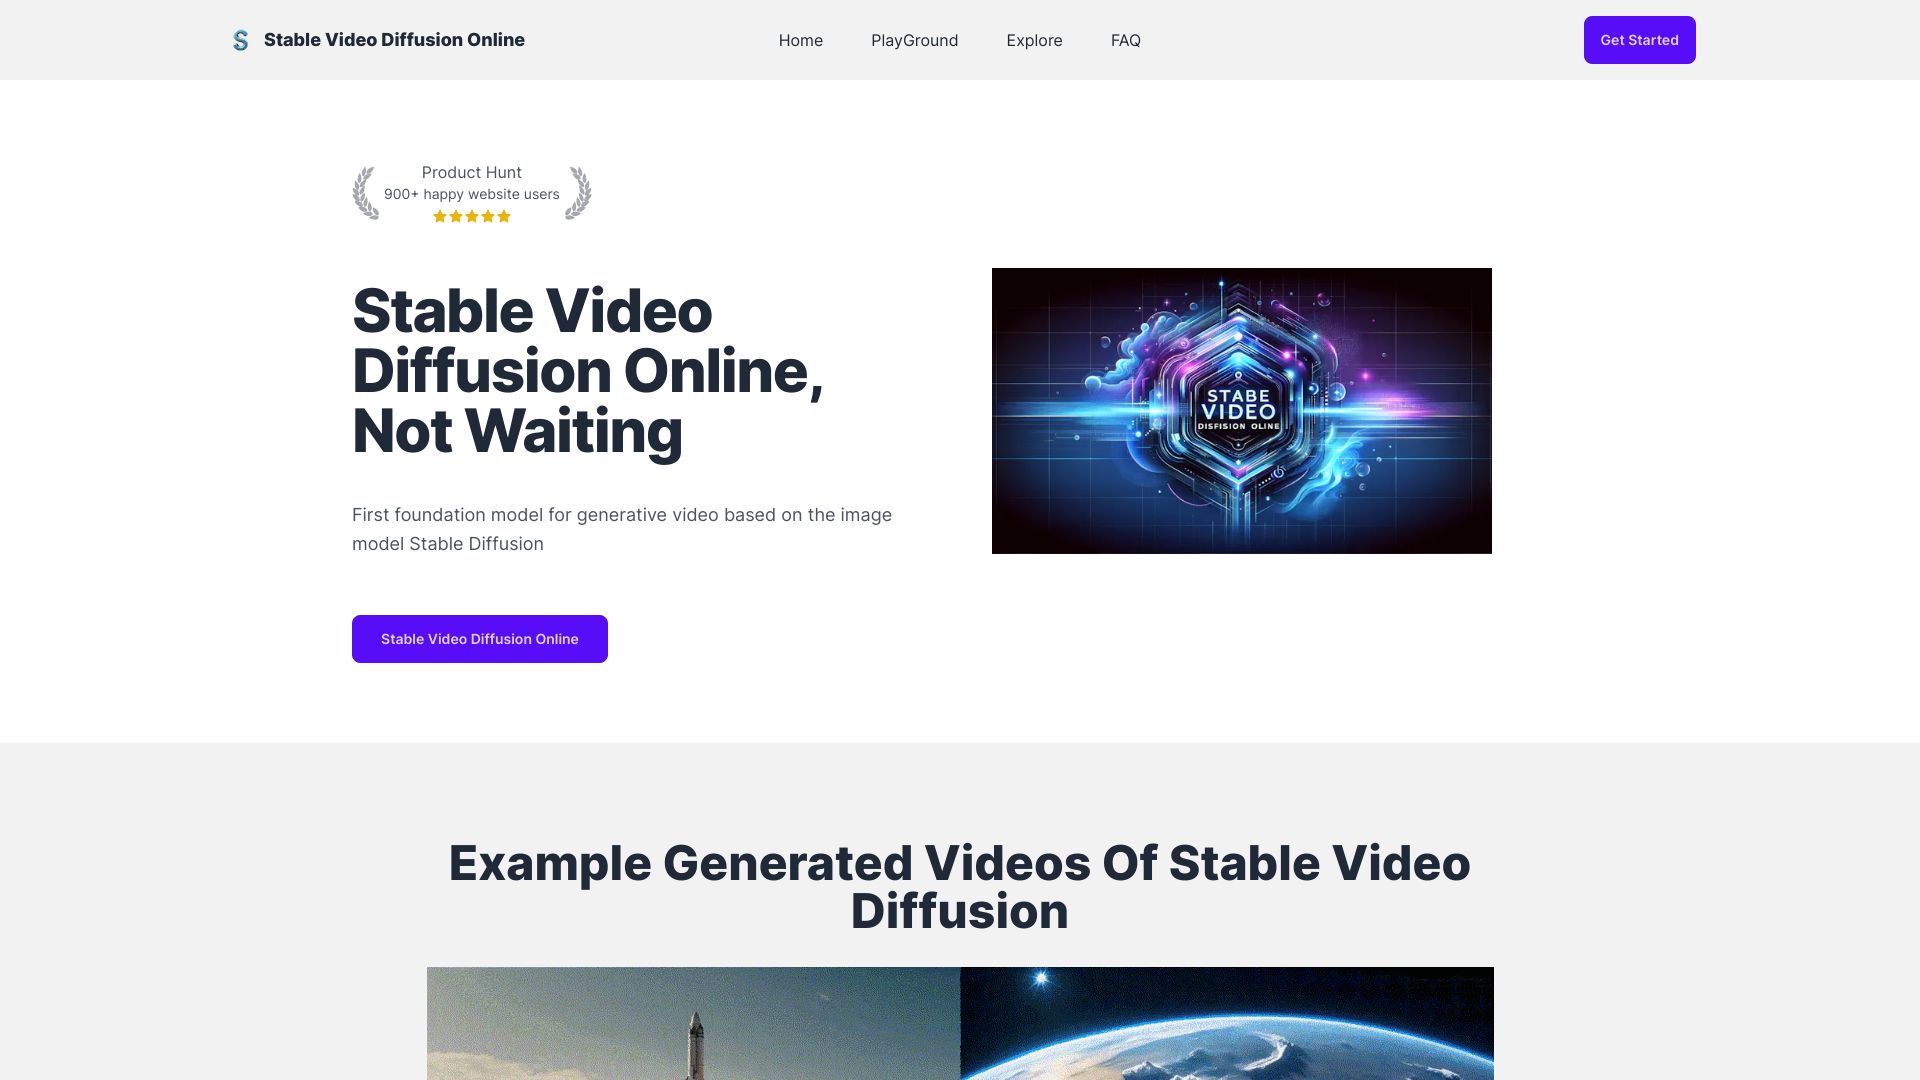 Stable Video Diffusion Online